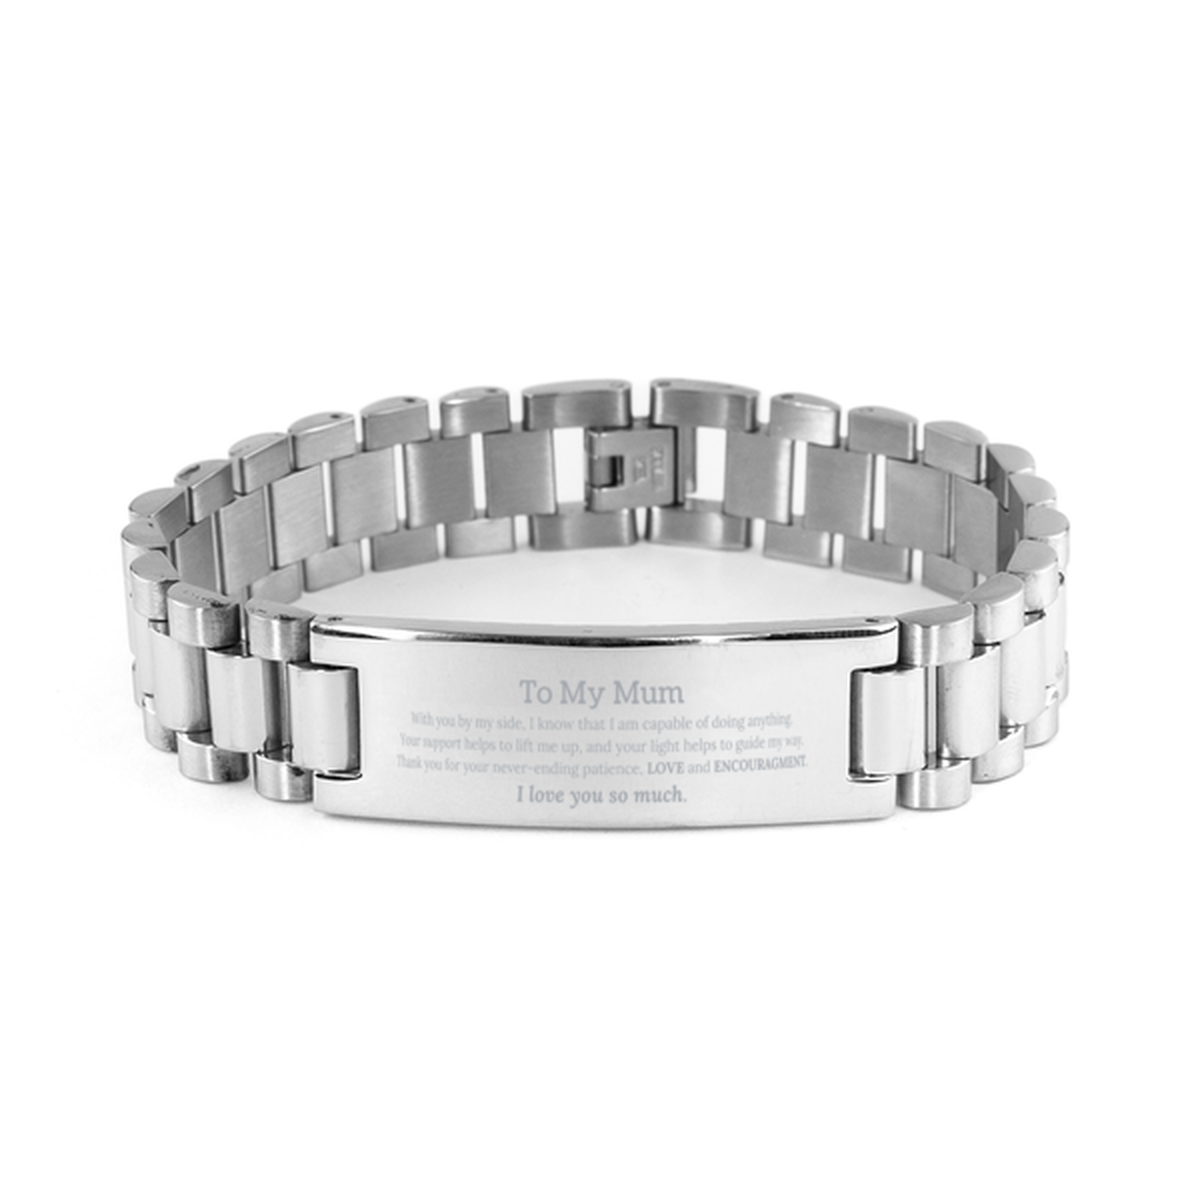 Appreciation Mum Ladder Stainless Steel Bracelet Gifts, To My Mum Birthday Christmas Wedding Keepsake Gifts for Mum With you by my side, I know that I am capable of doing anything. I love you so much